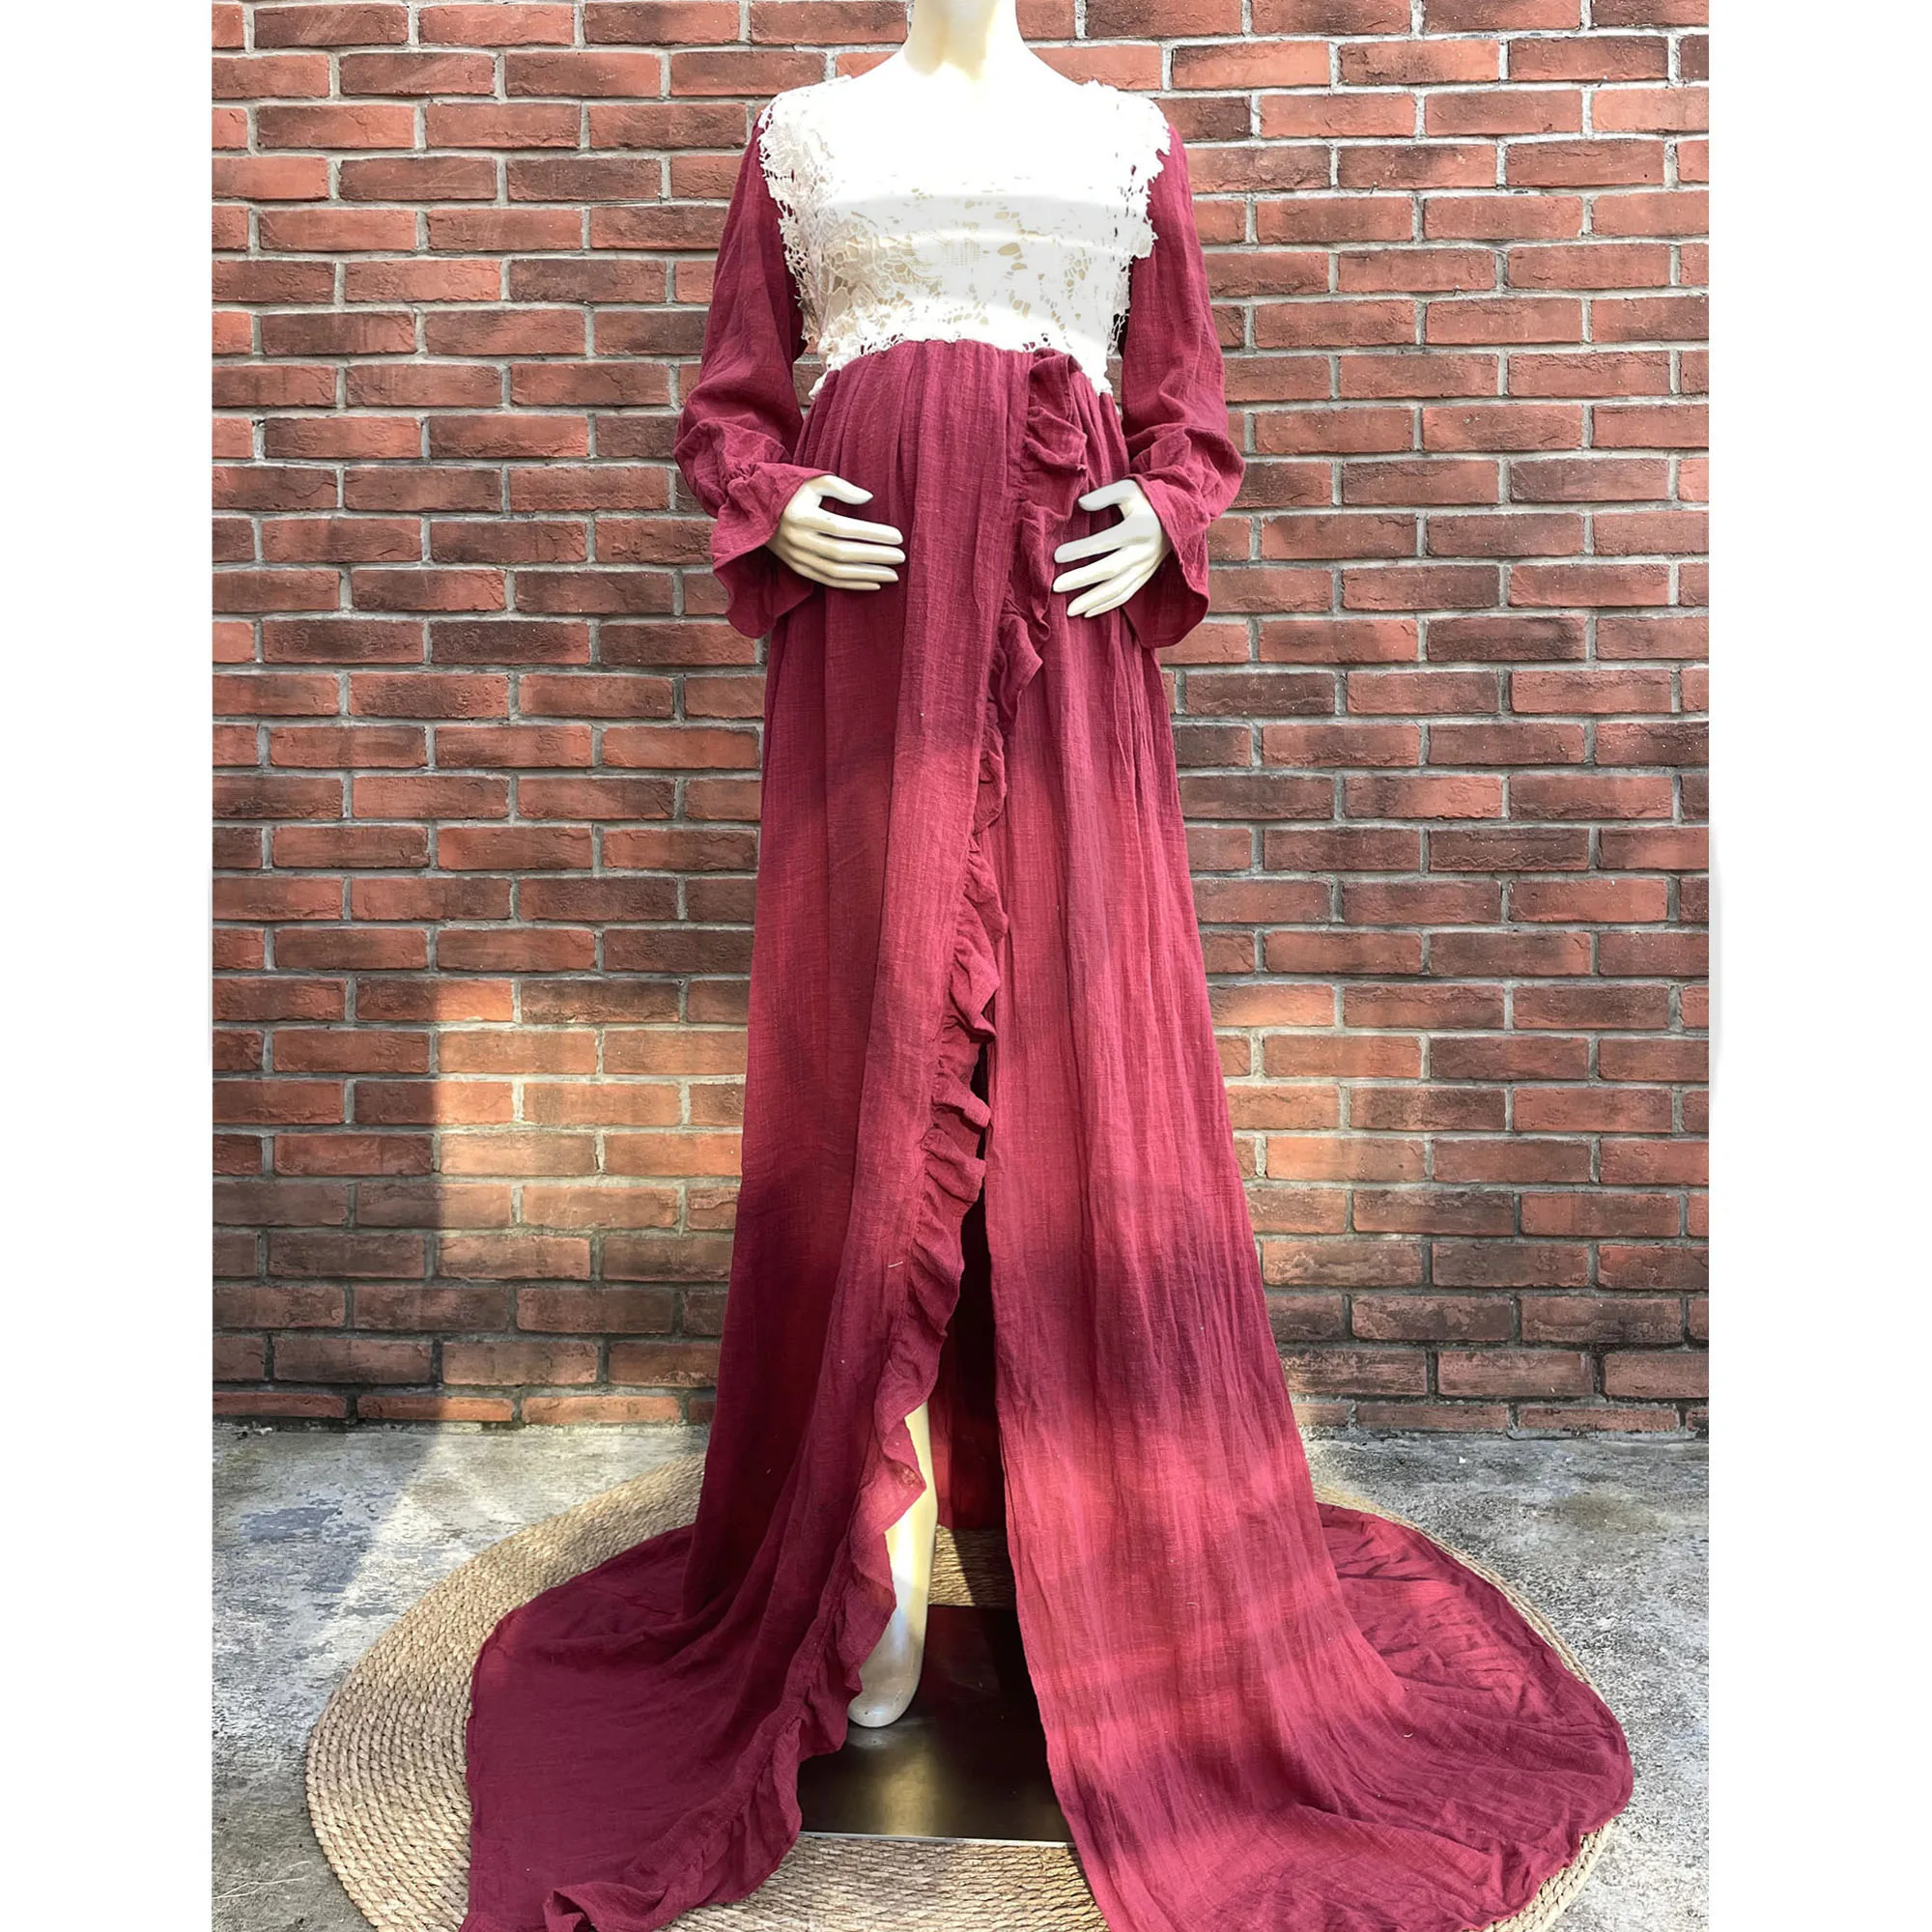 Photo Shoot Props Maxi Cotton Kaftan Full Sleeves Robe Maternity Dress Evening Party Costume for Women Photography Accessories